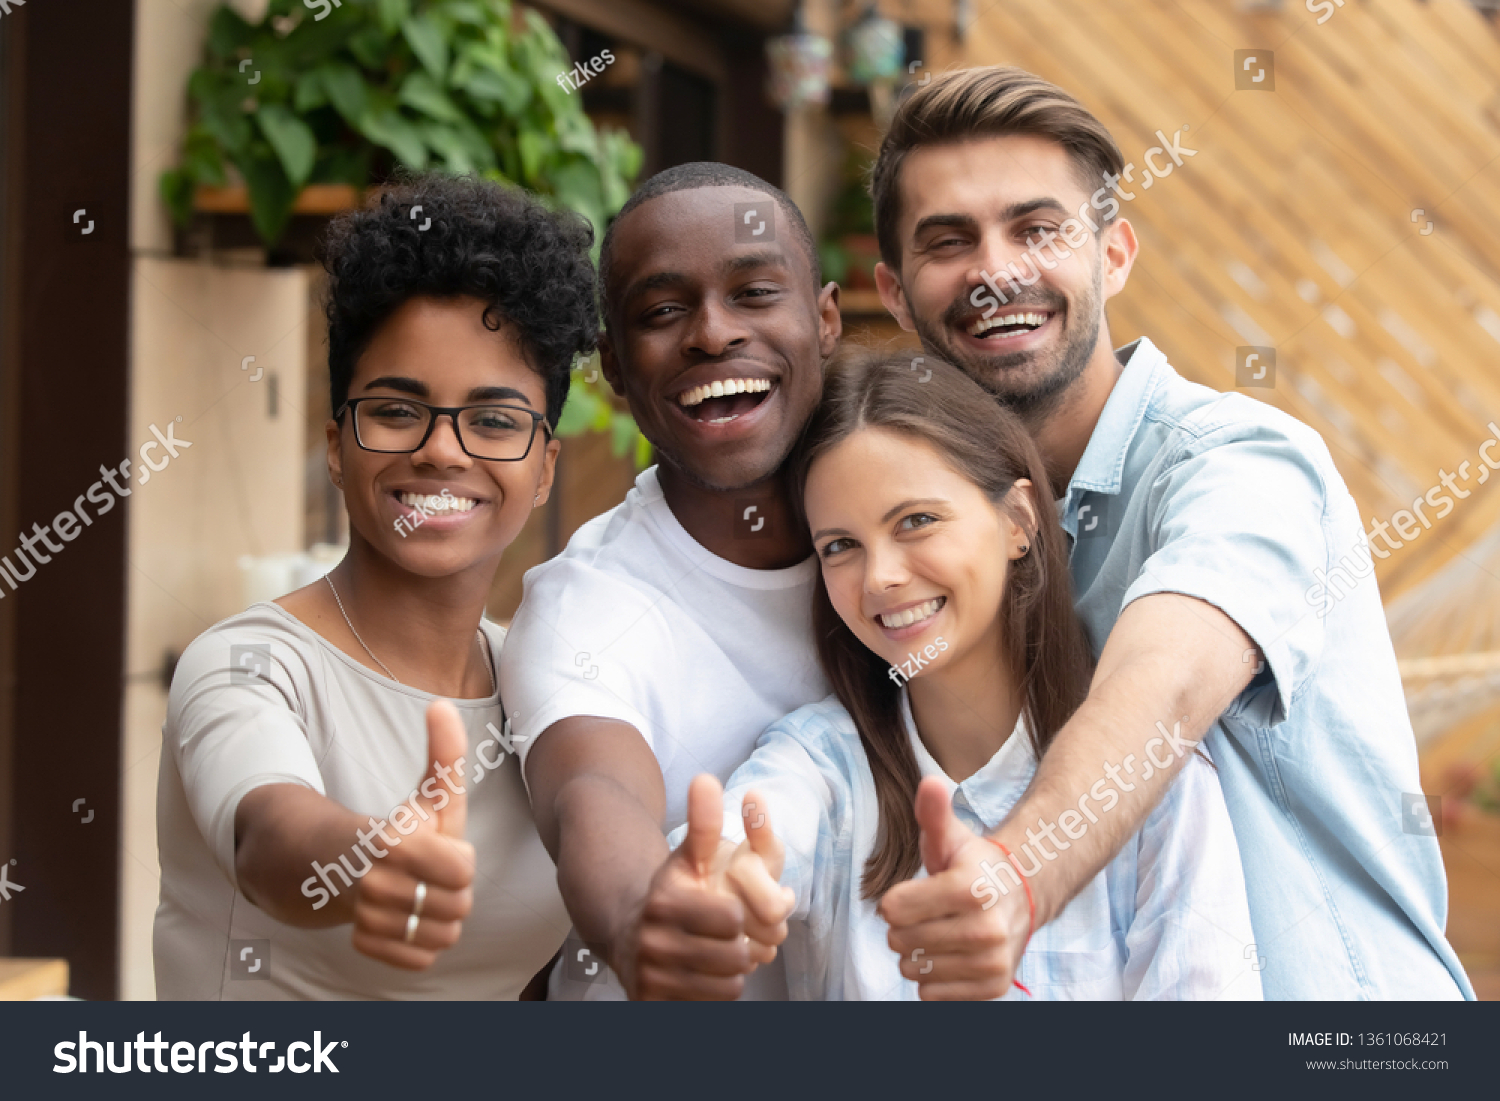 Happy multi ethnic friends group showing thumbs up, smiling diverse young people looking at camera with like gesture recommend good quality racial diversity equality, multiracial friendship, portrait #1361068421